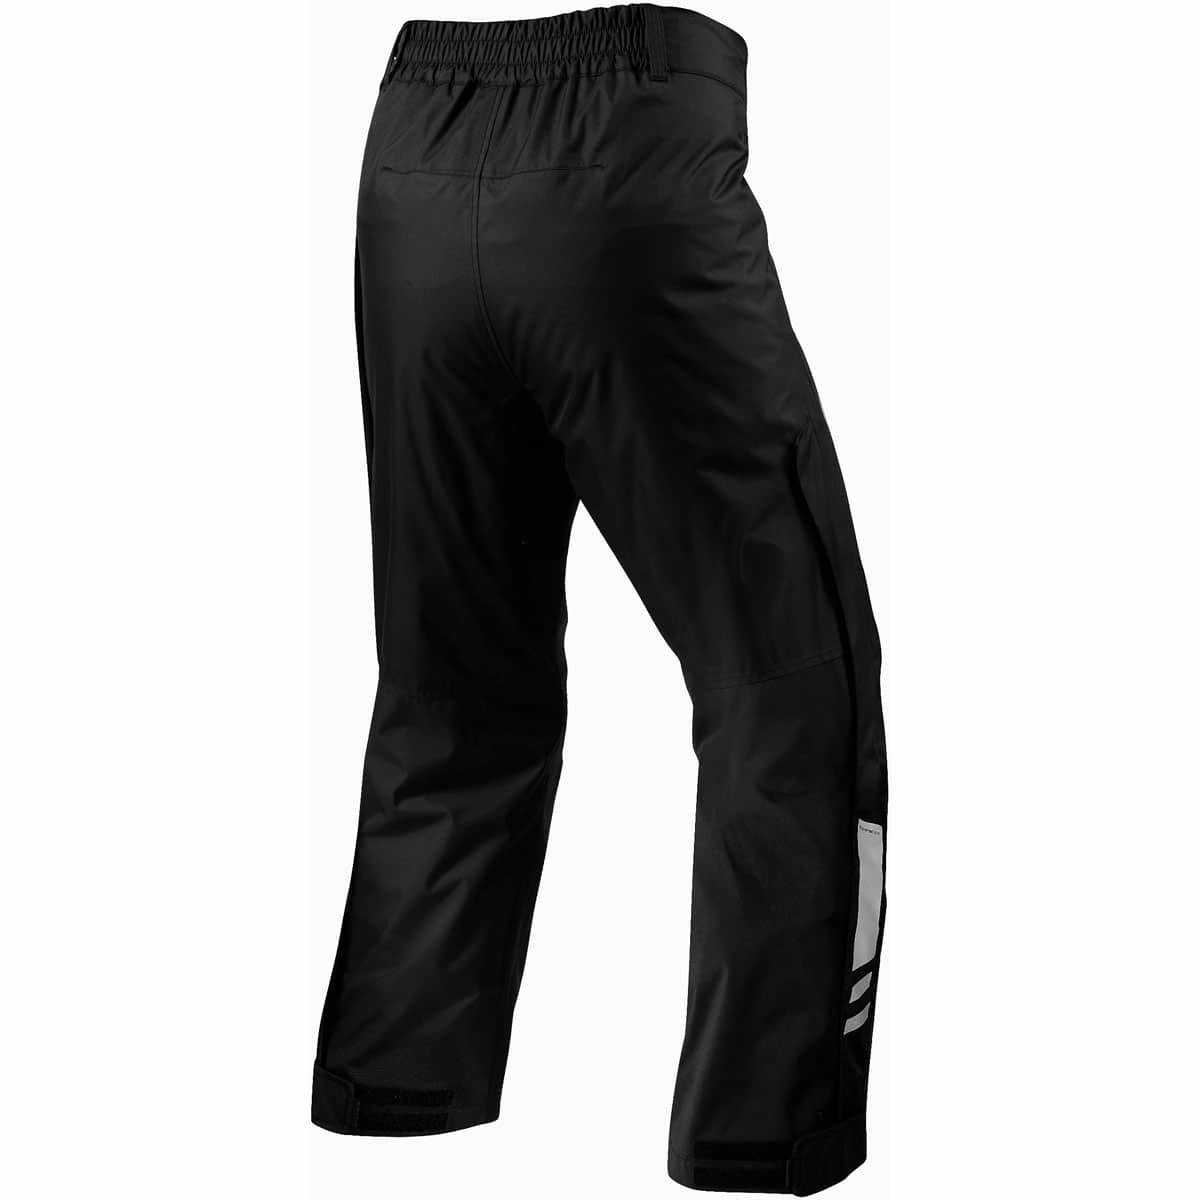 Revit Nitric 4 H2O Rain Overtrousers: 100% waterproof, a high-quality mesh liner & extra long zip openings